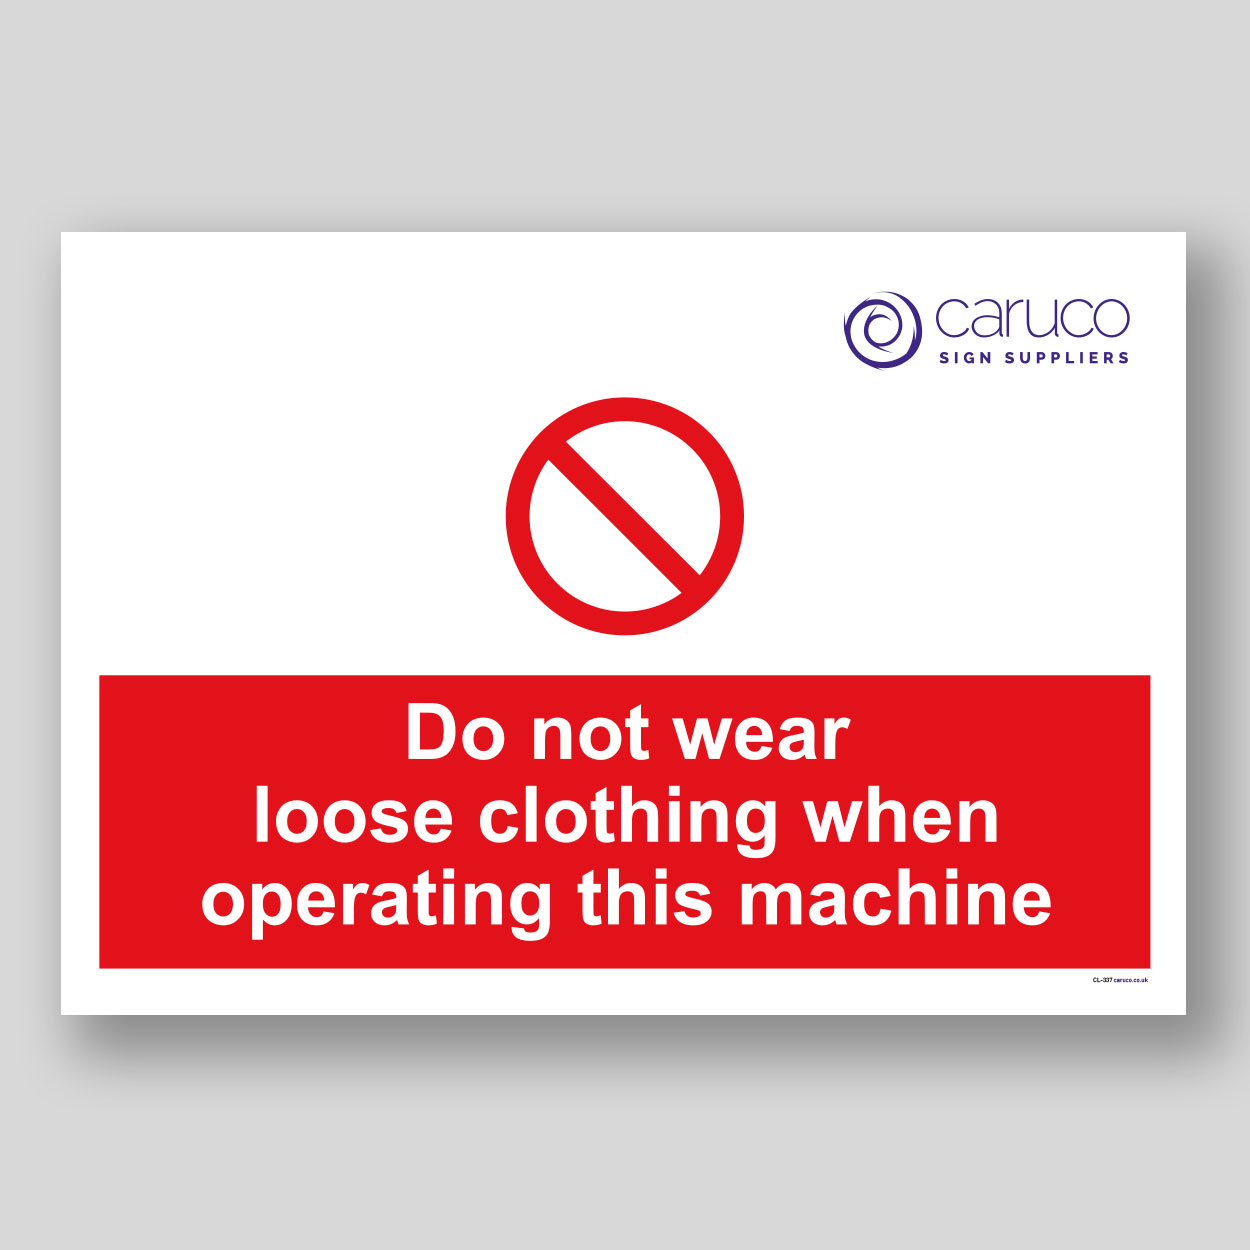 CL-337 Do not wear loose clothing when operating machine